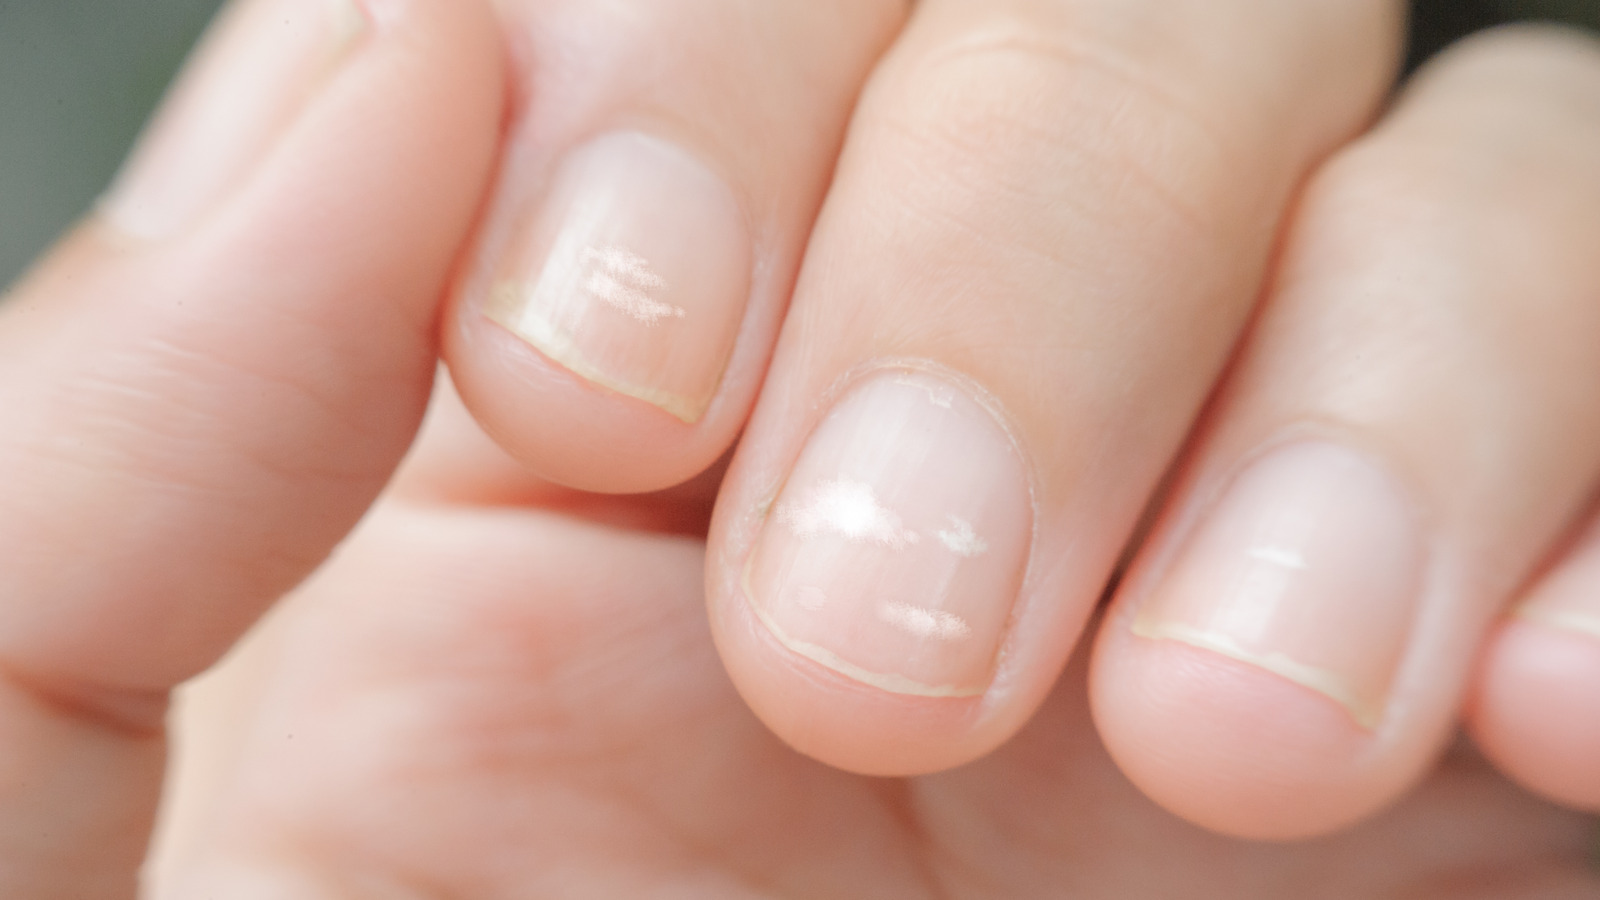 Weird nail changes during pregnancy but normal tests other than anemia :  r/medical_advice